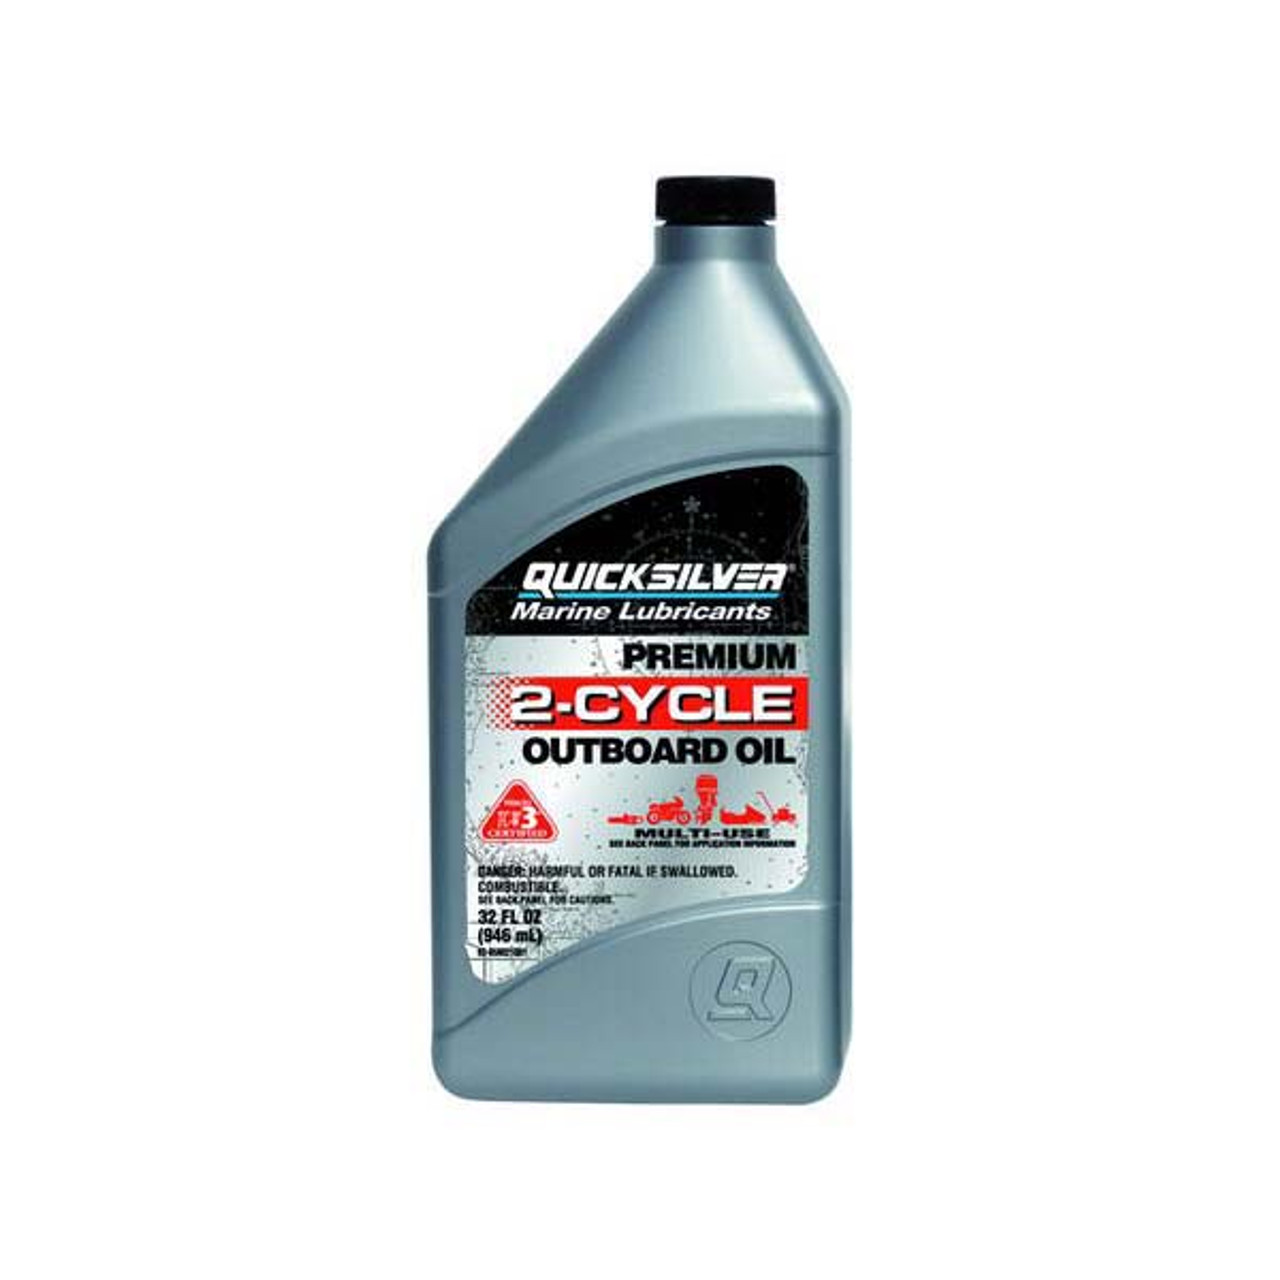 quicksilver motorcycle oil review